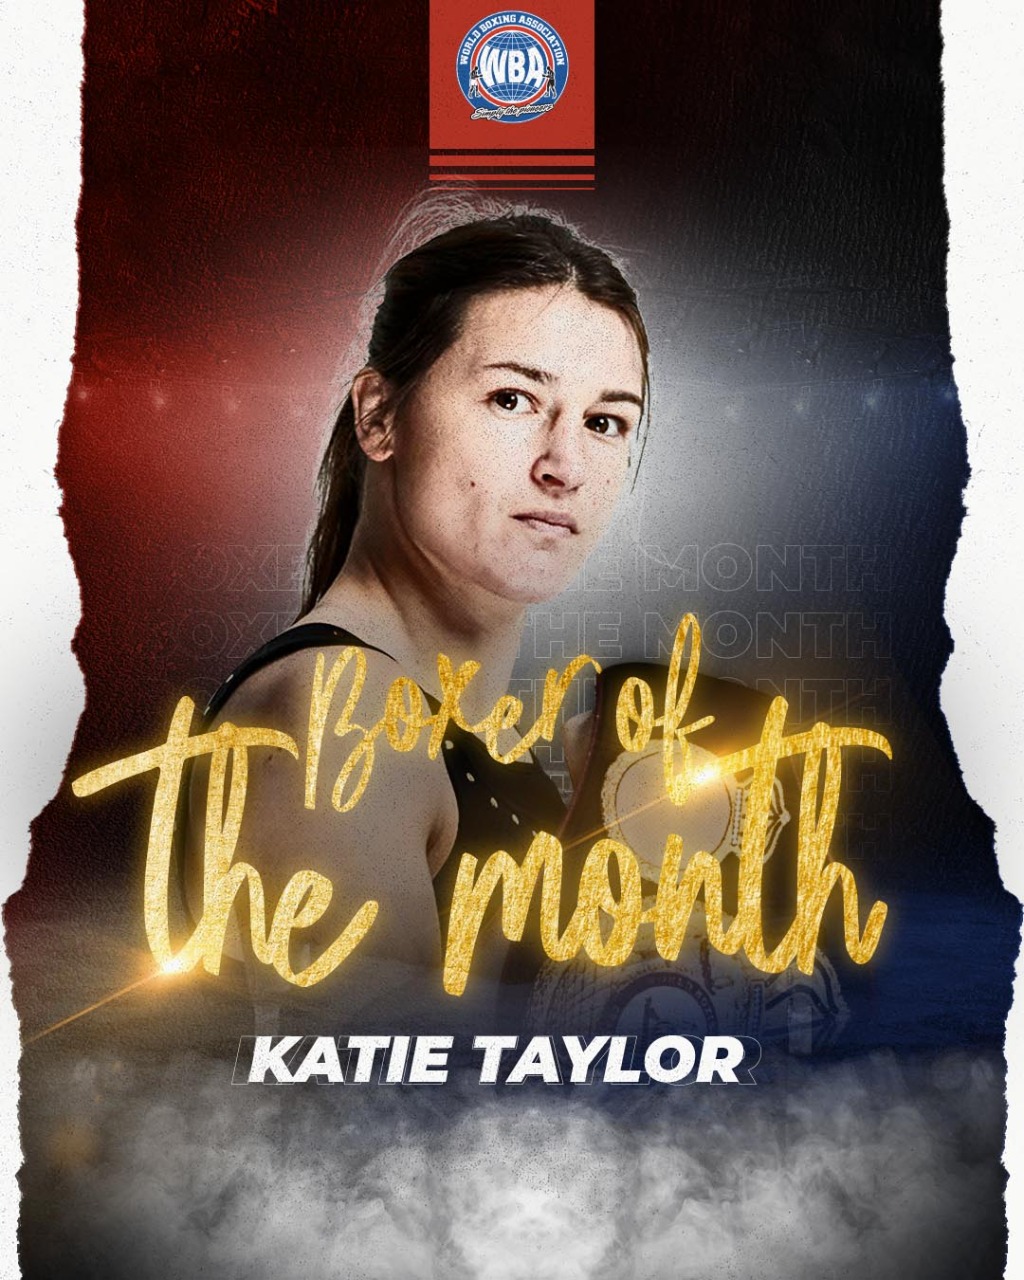 Katie Taylor was the most outstanding of September